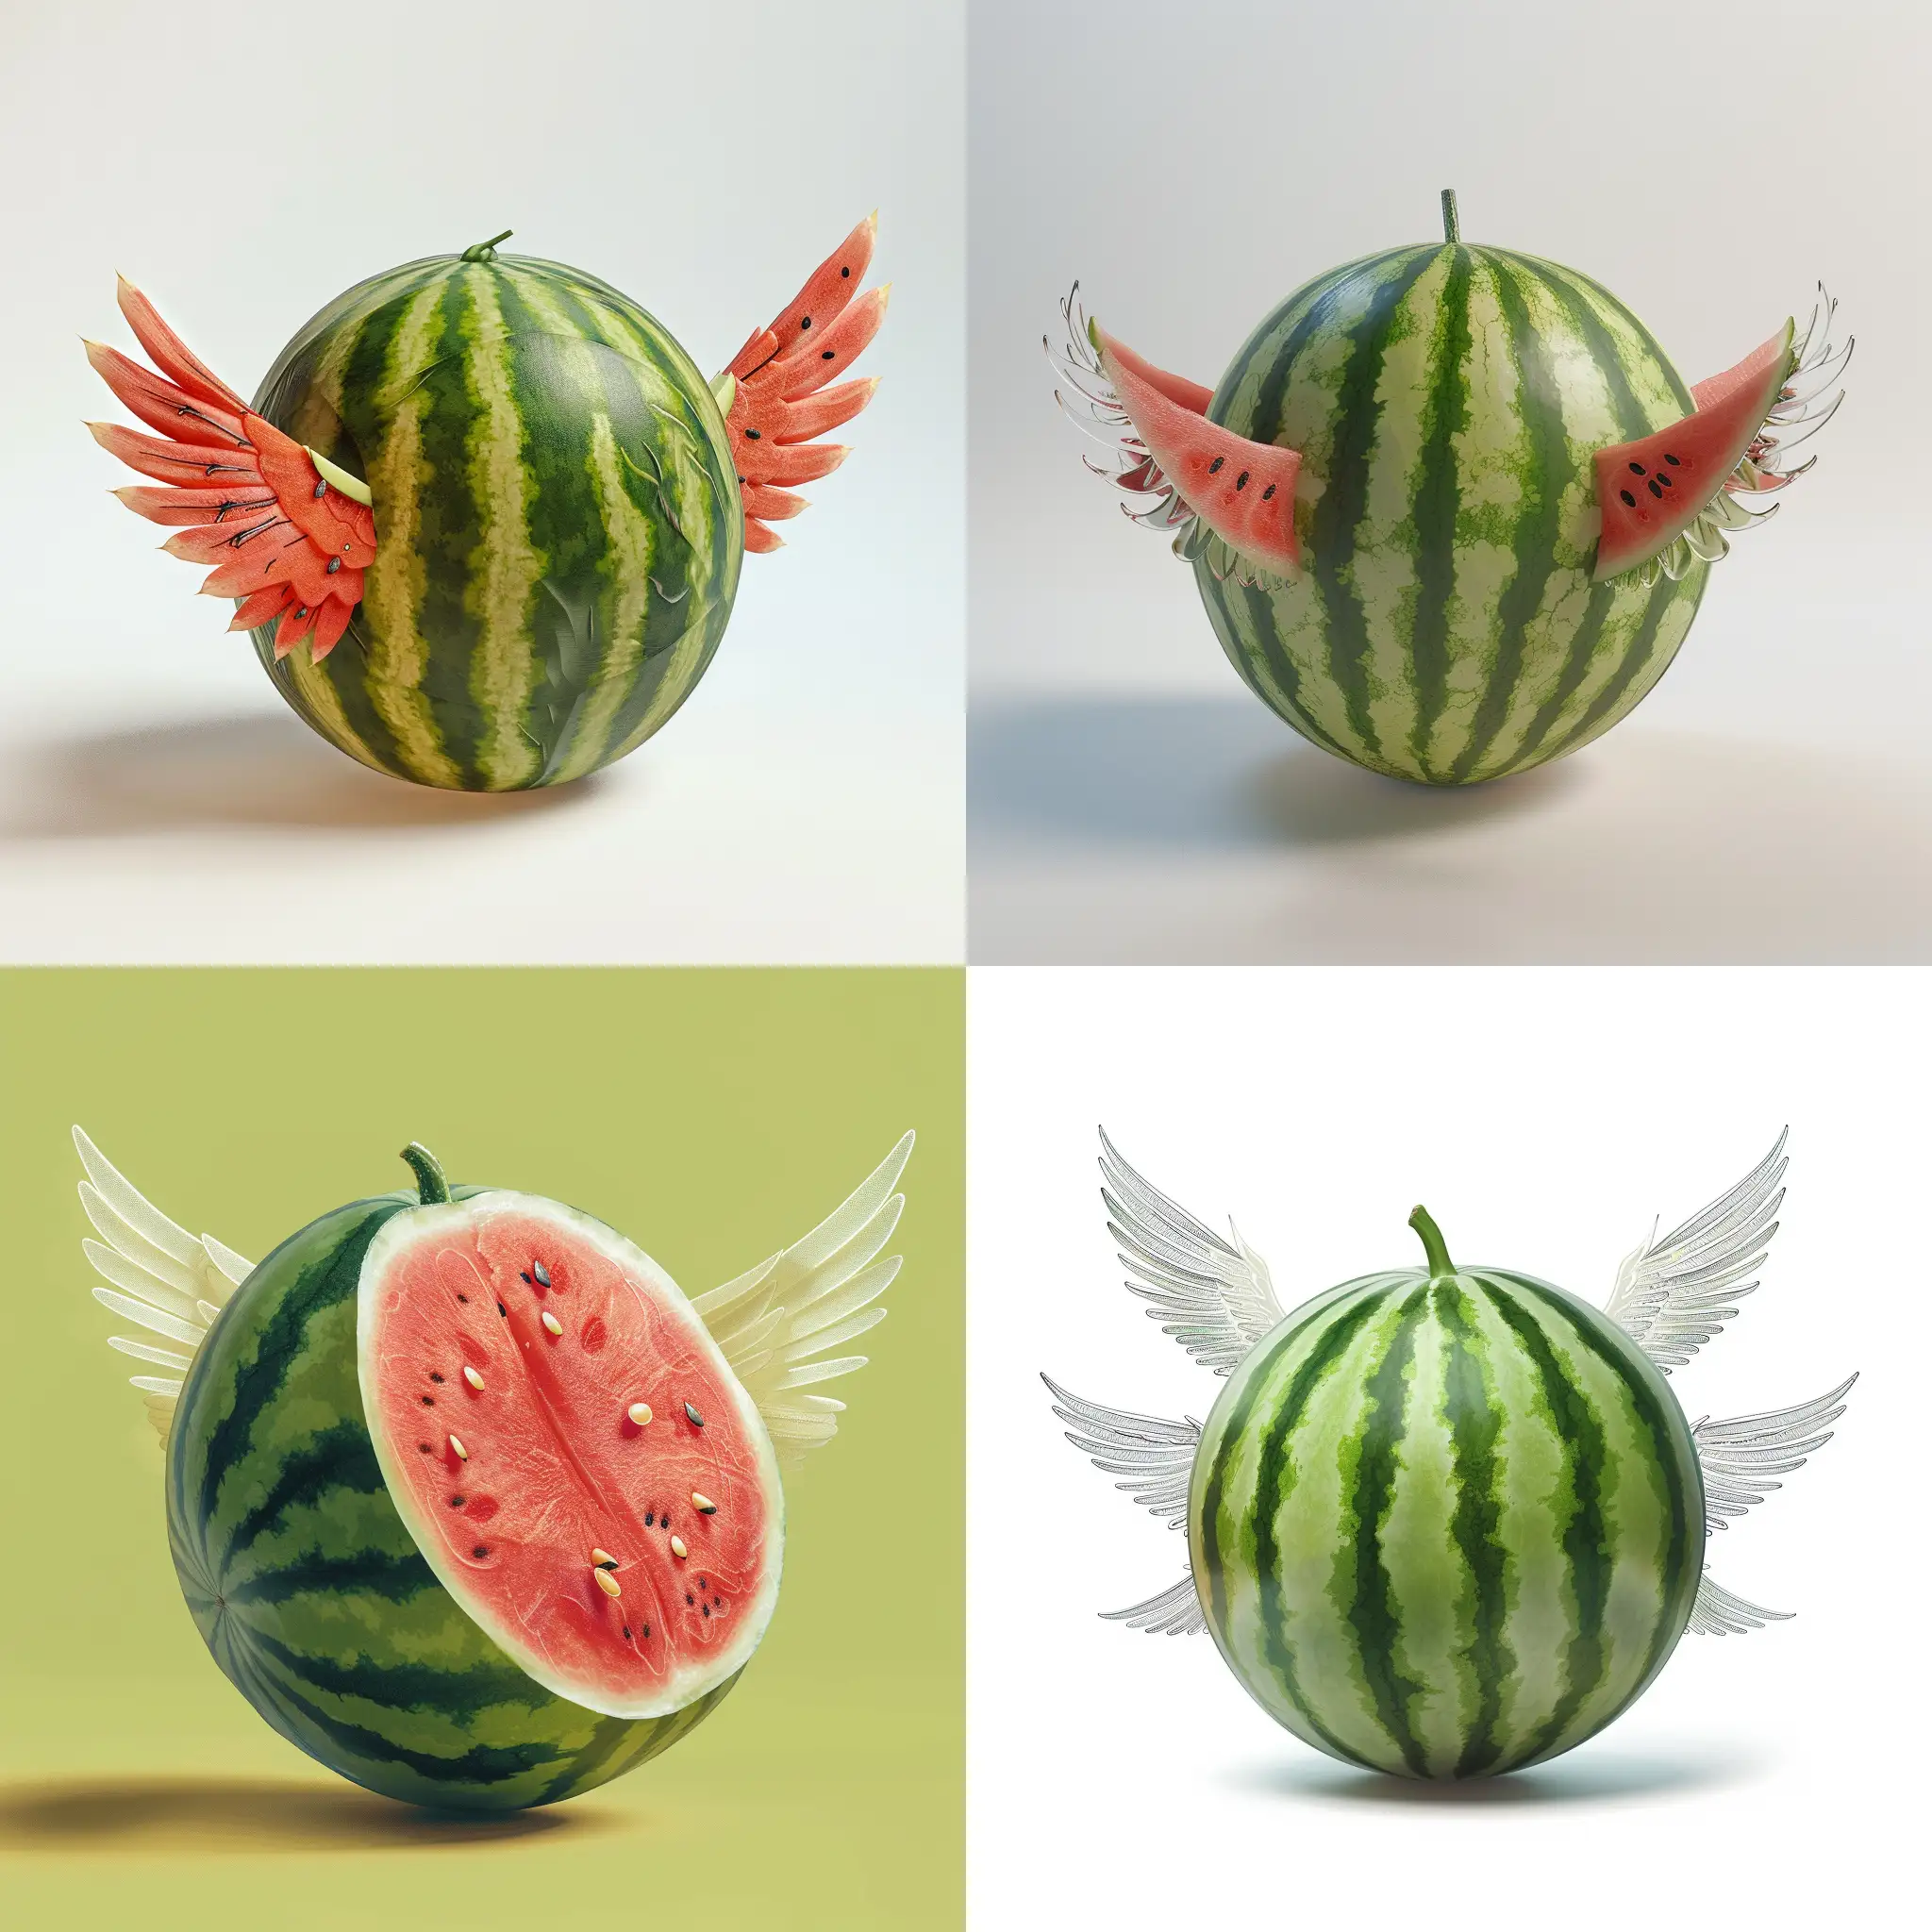 A watermelon with wings, realistic